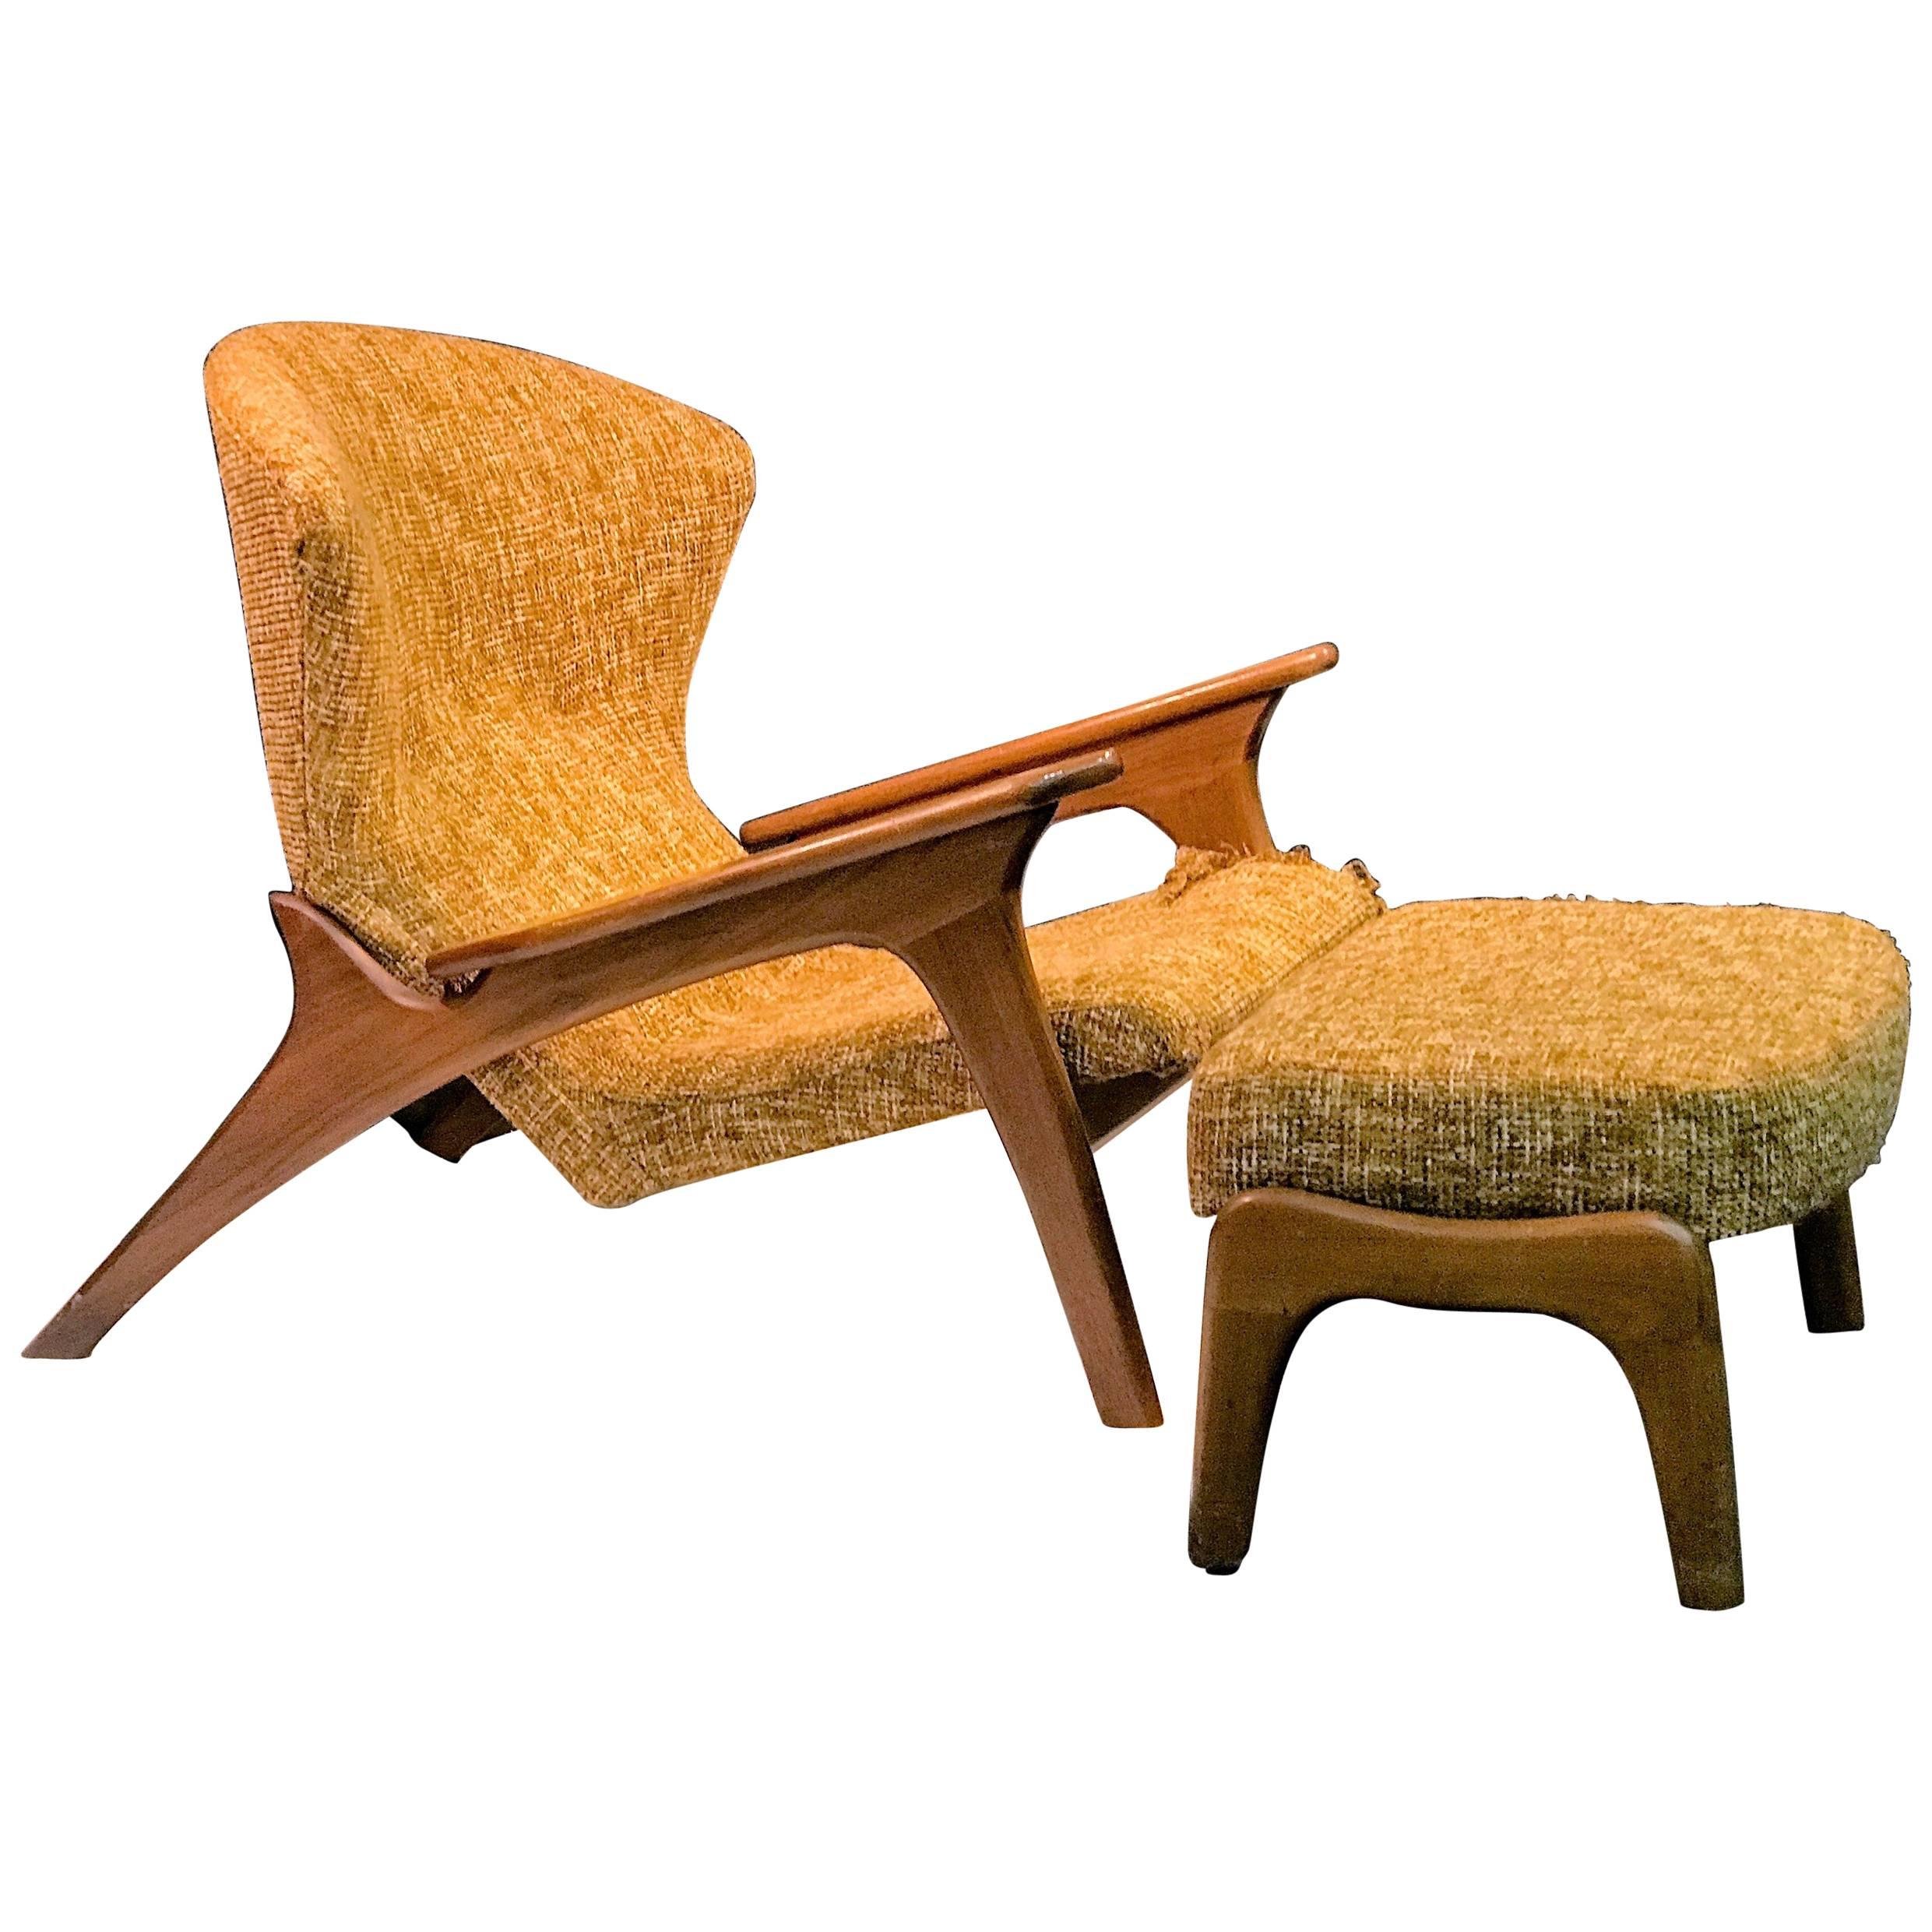 Angular Grasshopper Chair and Ottoman by Adrian Pearsall For Sale